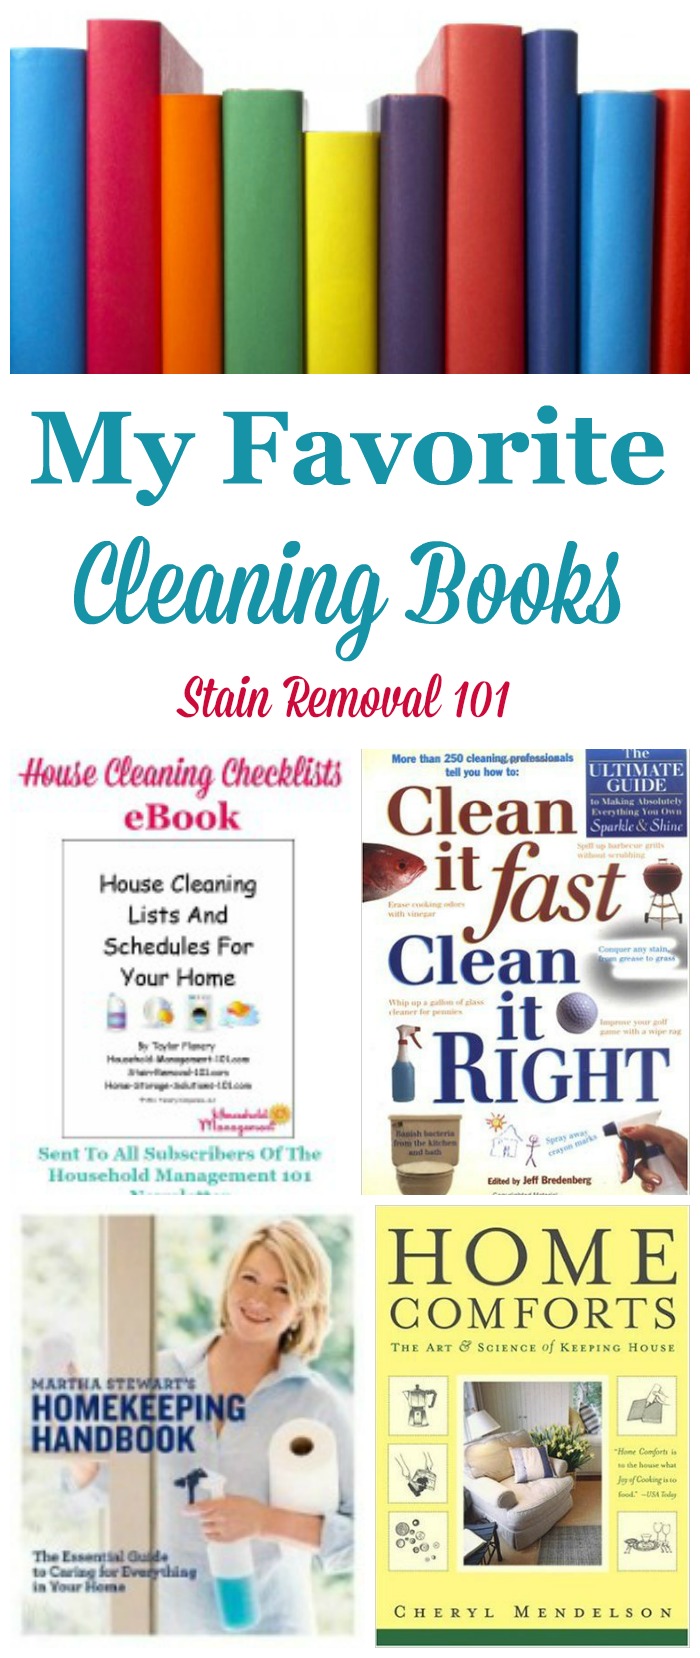 It's nice to have resources when you've got a stain or cleaning emergency. Here are my favorite stain removal and house cleaning books, to make sure you've got the best information on hand. {on Stain Removal 101}